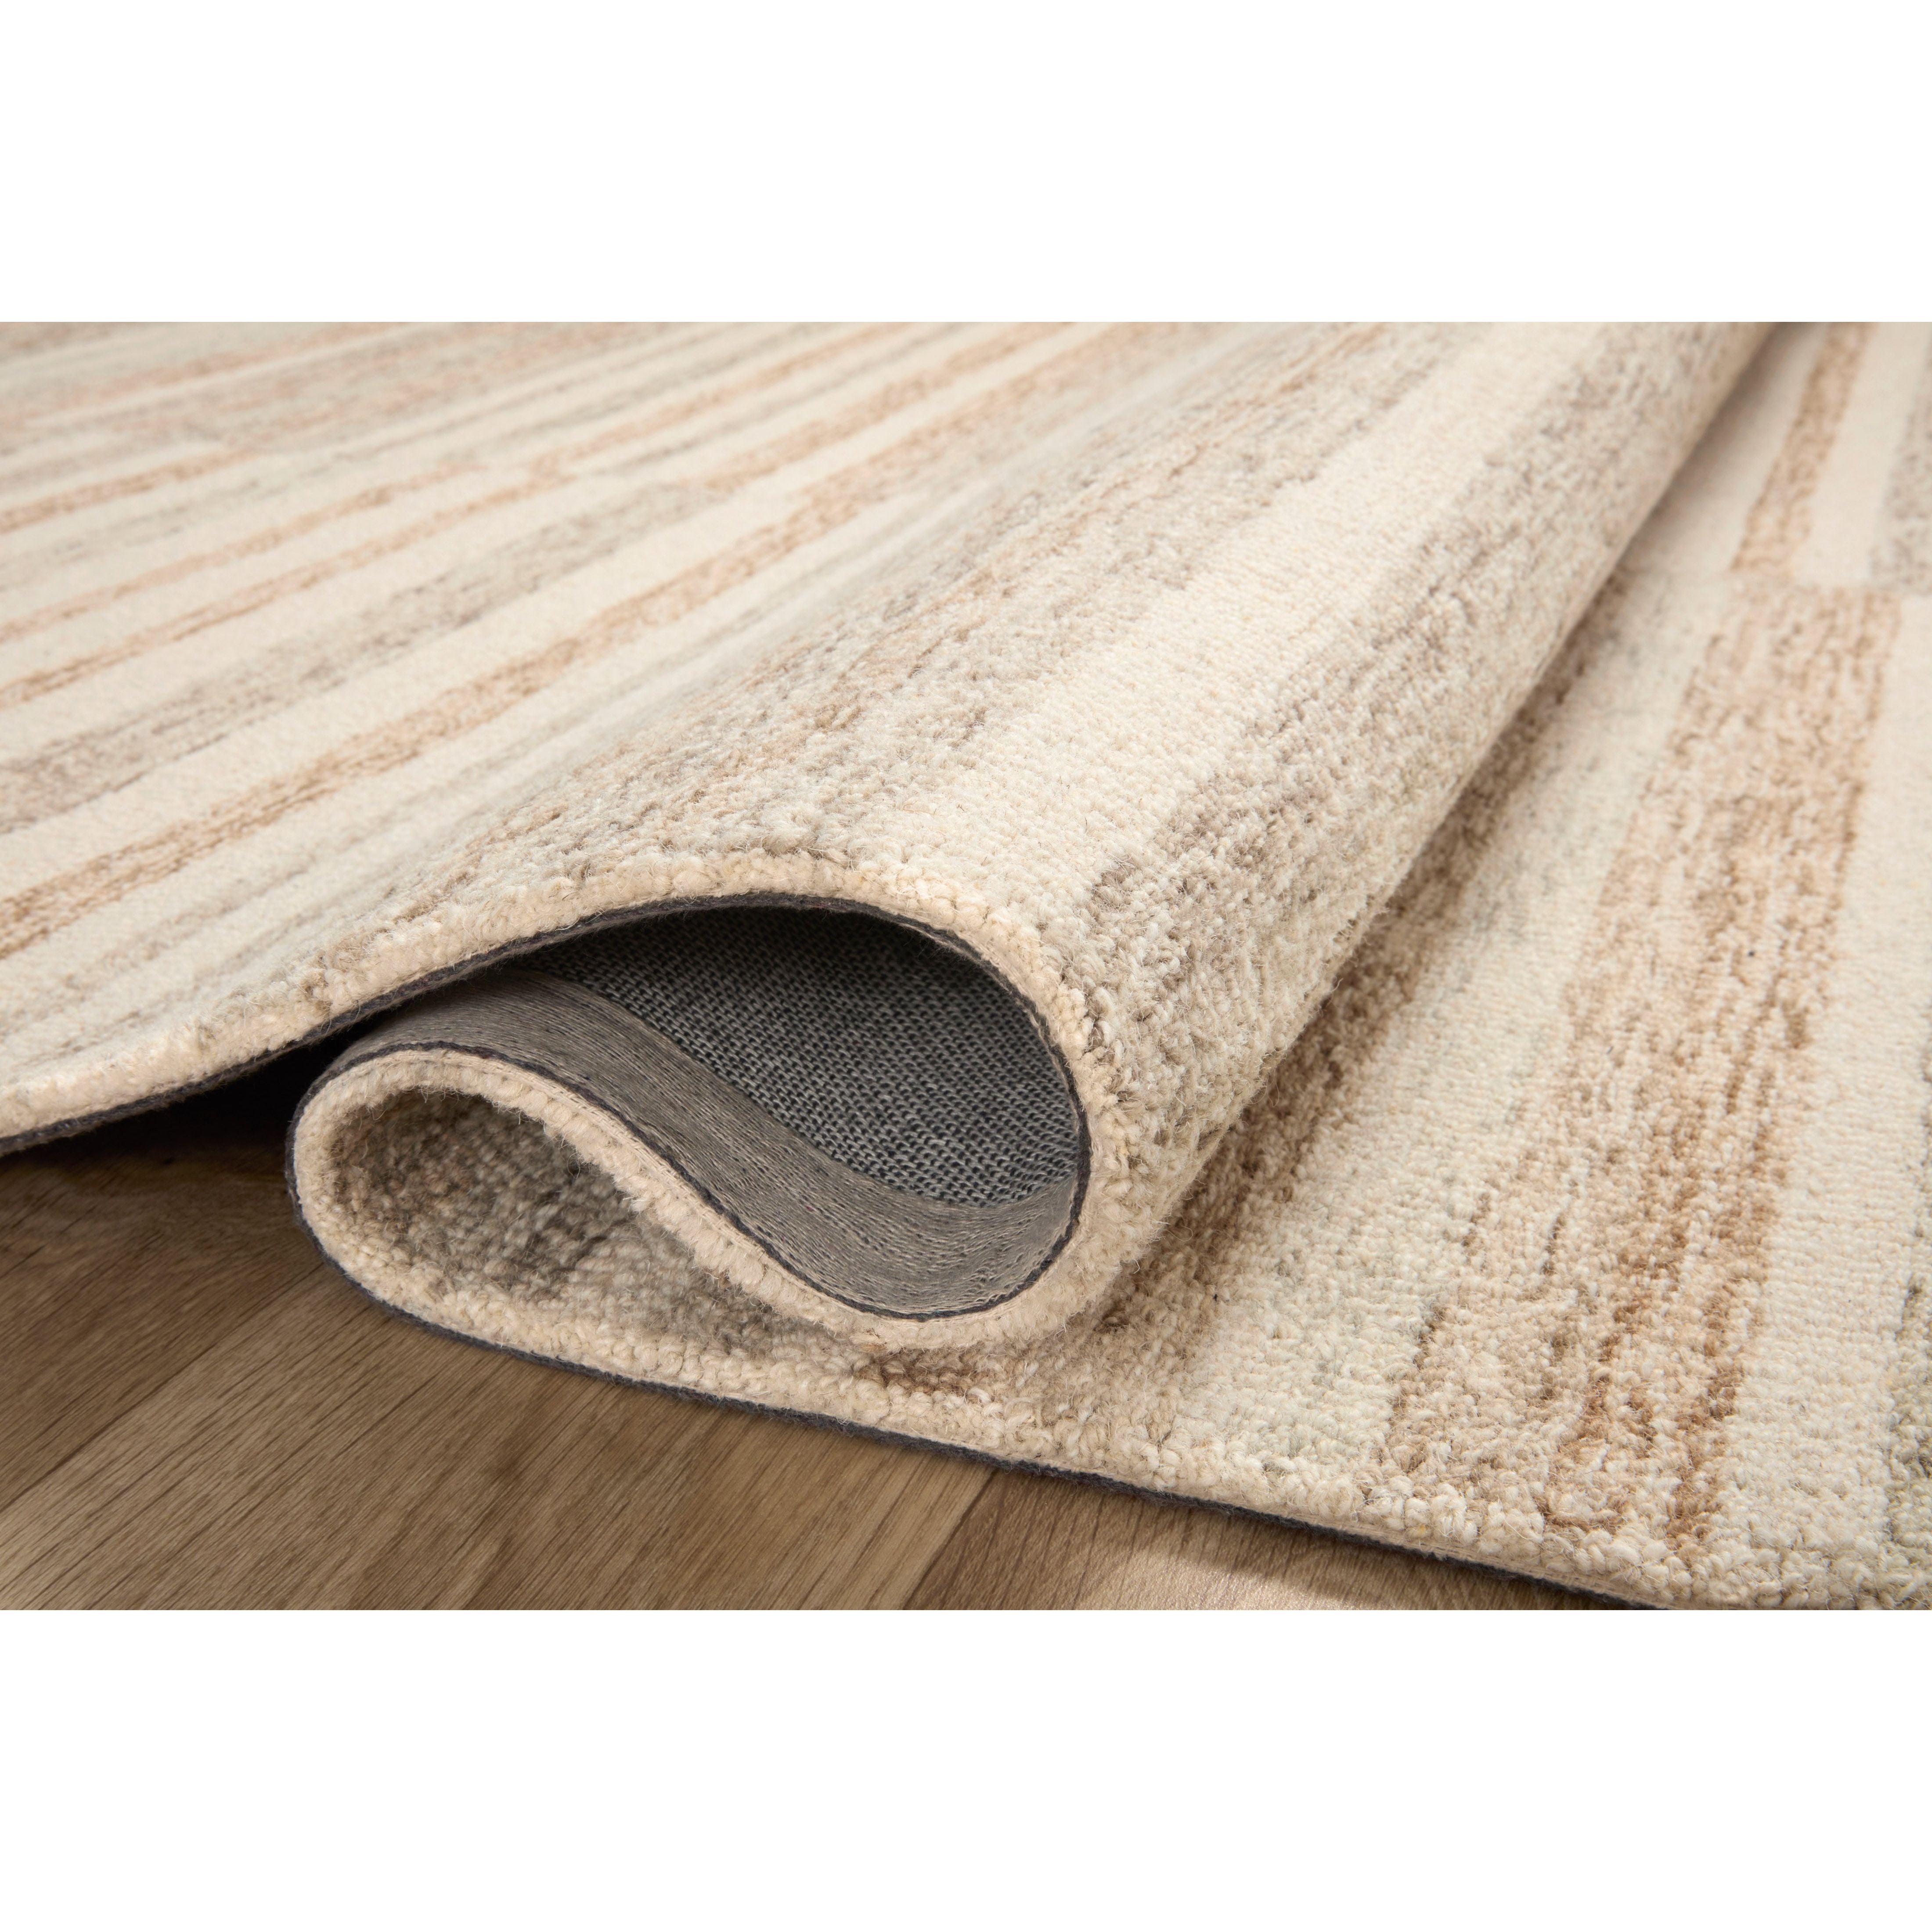 The subtle, warm tonal patterns remind us of our favorite California cool hemp rugs. Known for its durability, the Chris Ivory / Clay hooked wool rug is a smart choice for any room in your home that gets lots of love. Amethyst Home provides interior design services, furniture, rugs, and lighting in the Dallas metro area.